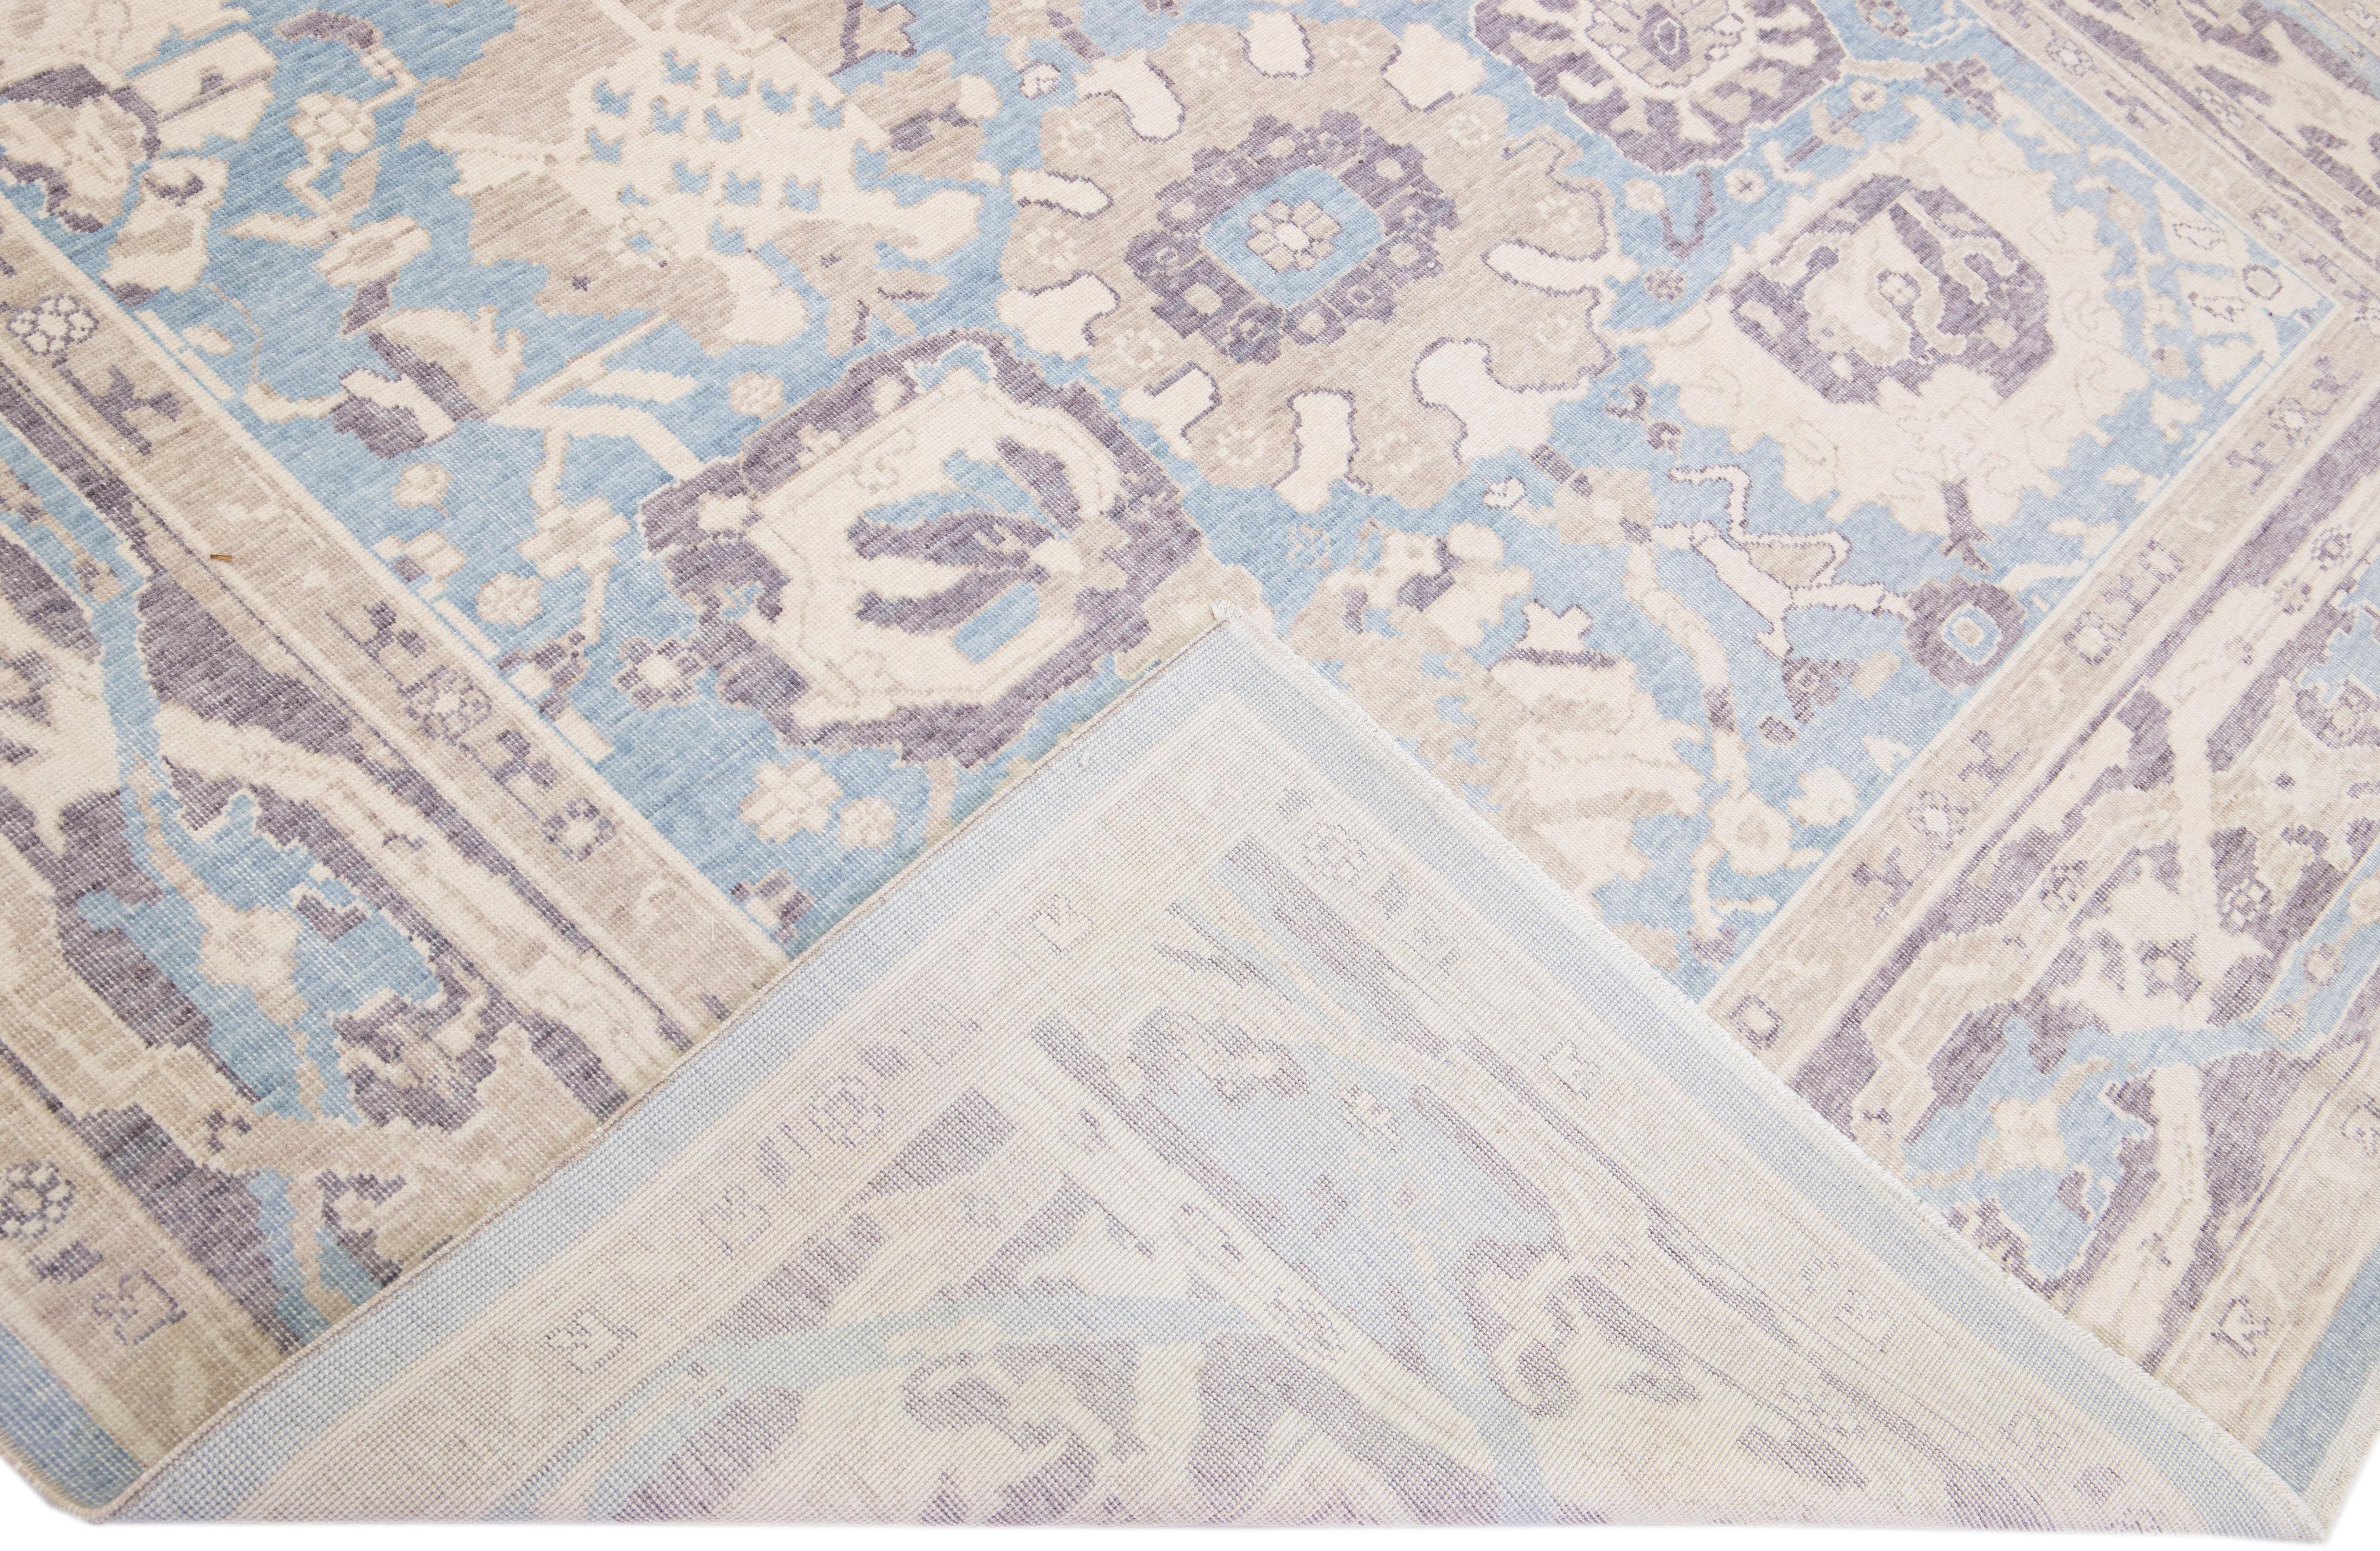 Beautiful modern Oushak hand-knotted wool rug with a blue color field. This Turkish Piece has a purple frame with beige accent colors in a gorgeous all-over floral design.

This rug measures: 7'10